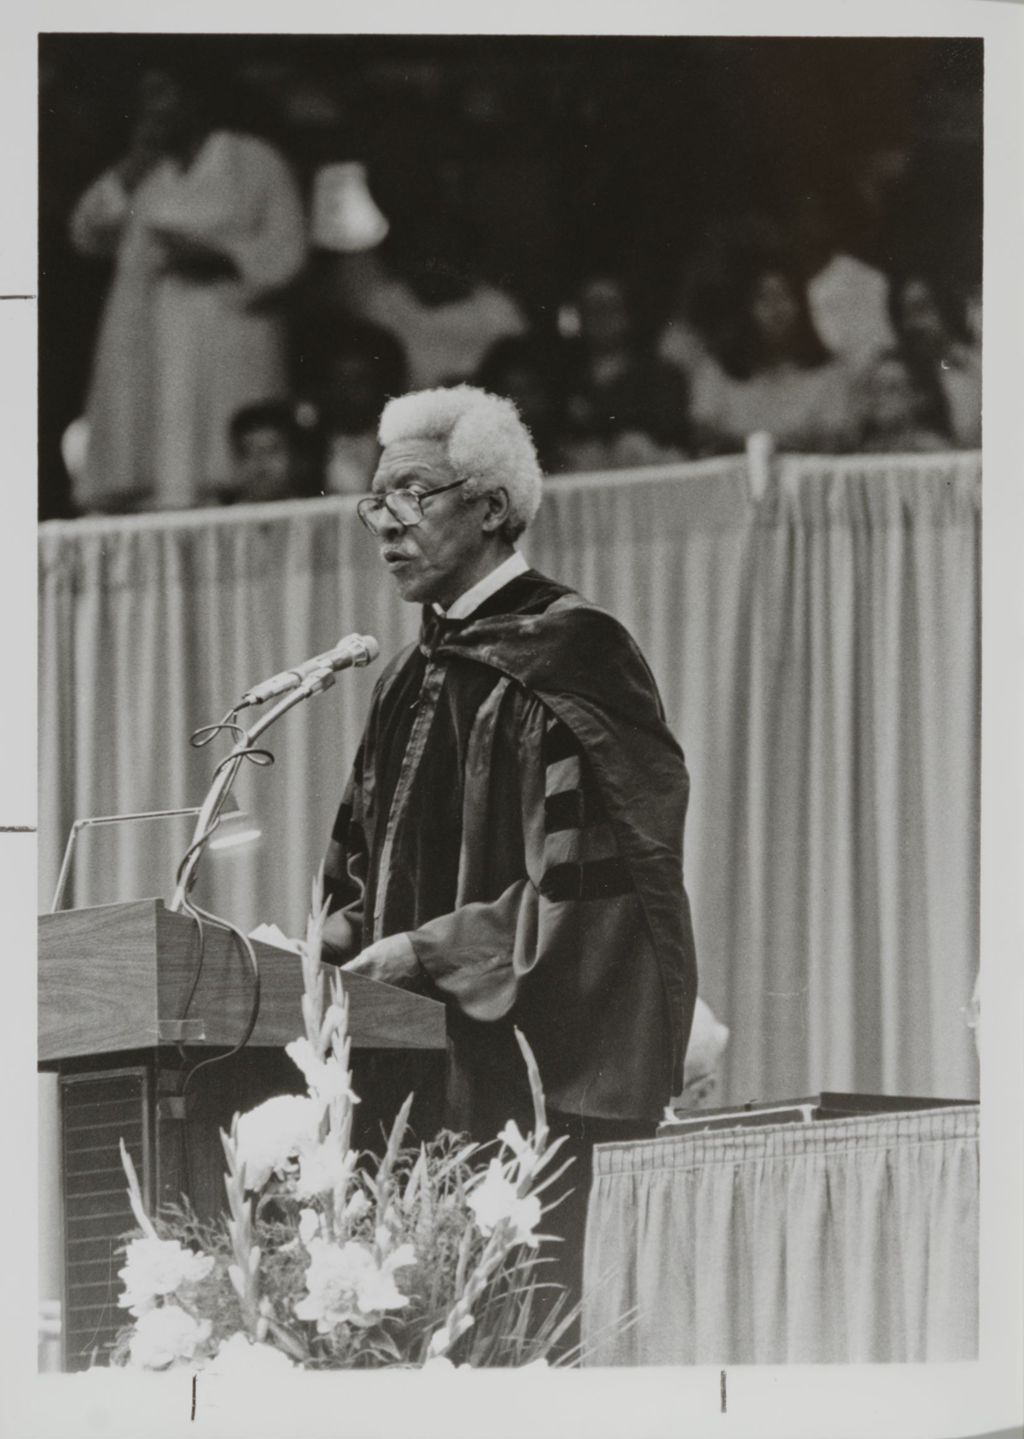 Bayard Rustin addressing the audience at the graduation ceremony